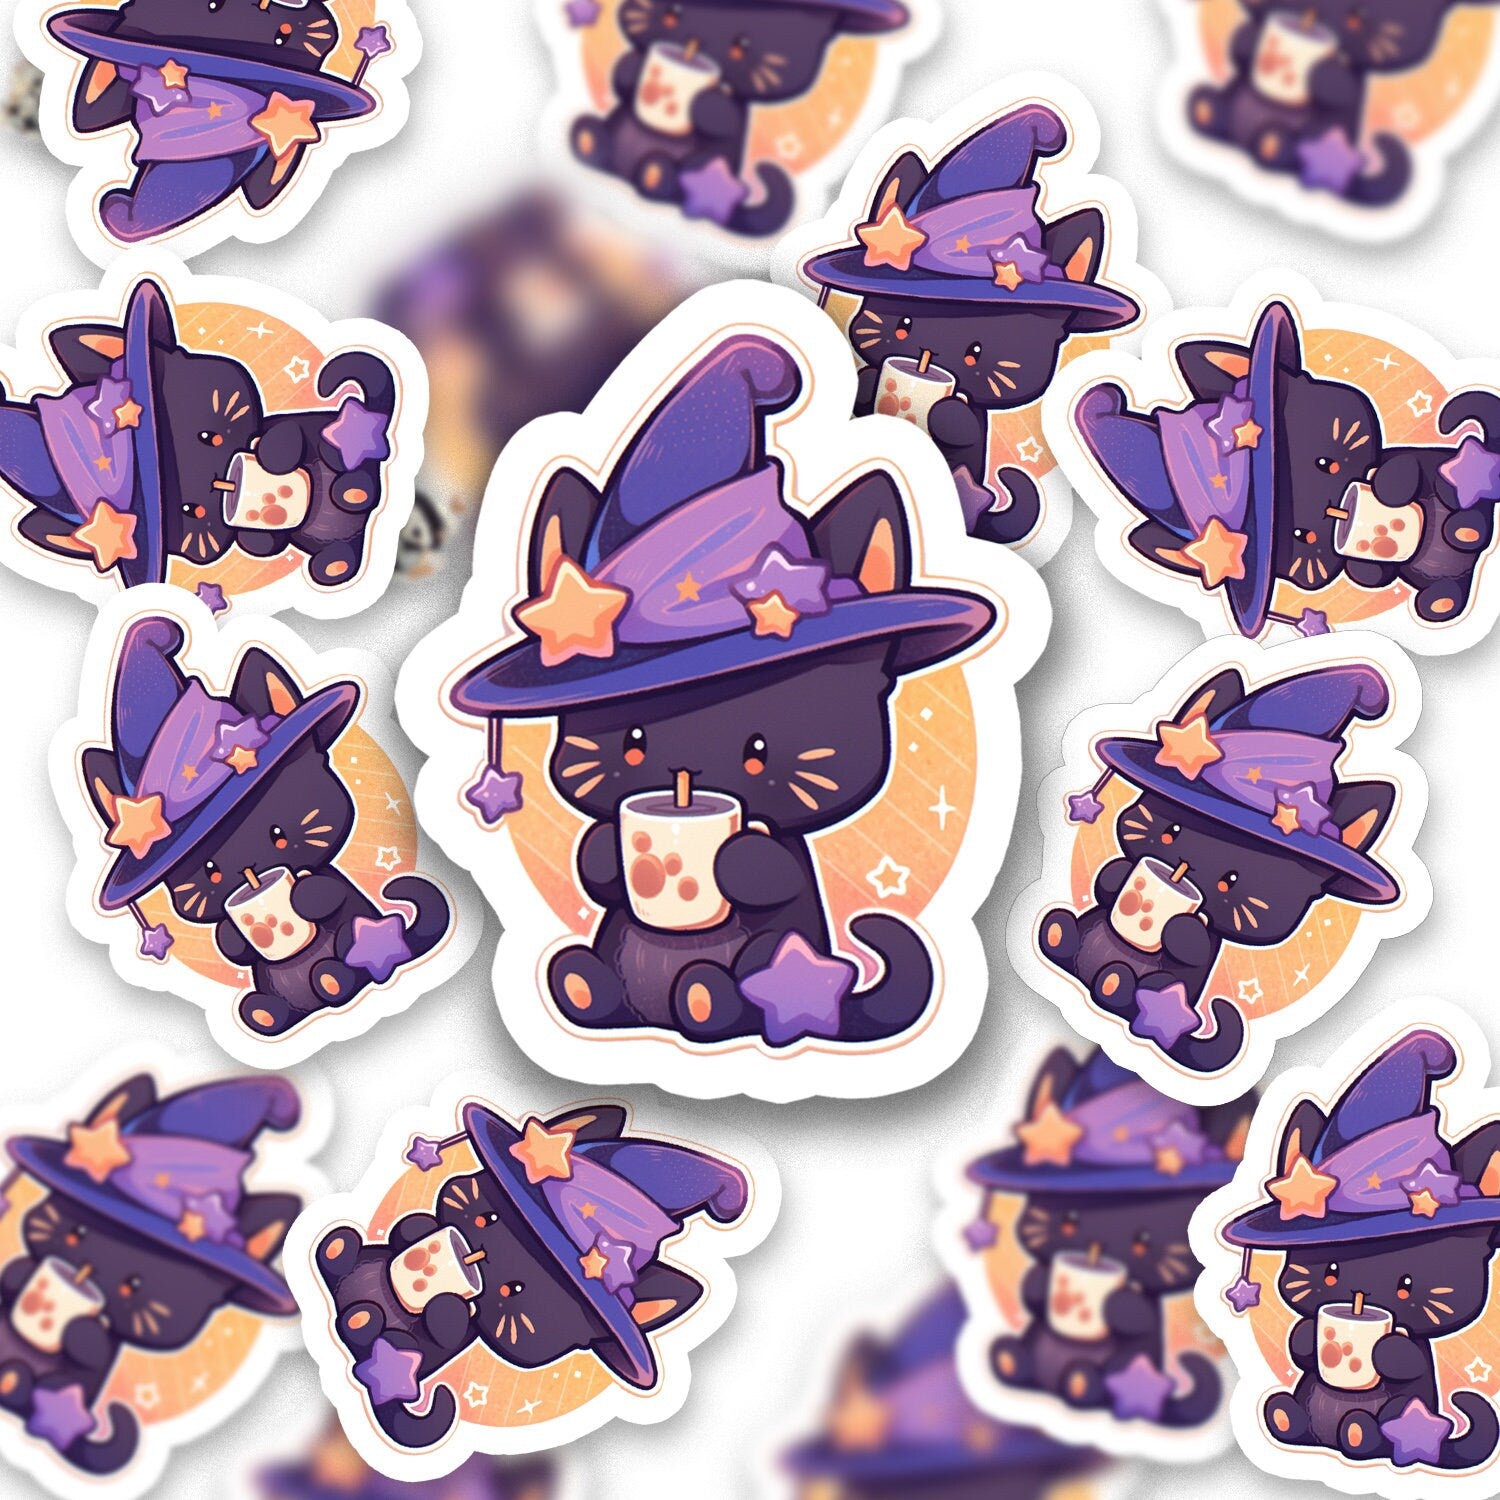 Halloween Witch Cat Holographic Sticker | Witchy Sticker Cute Girly Spiritual Sticker for Notebook, Laptop, Phone, IPad Kindle, Kawaii